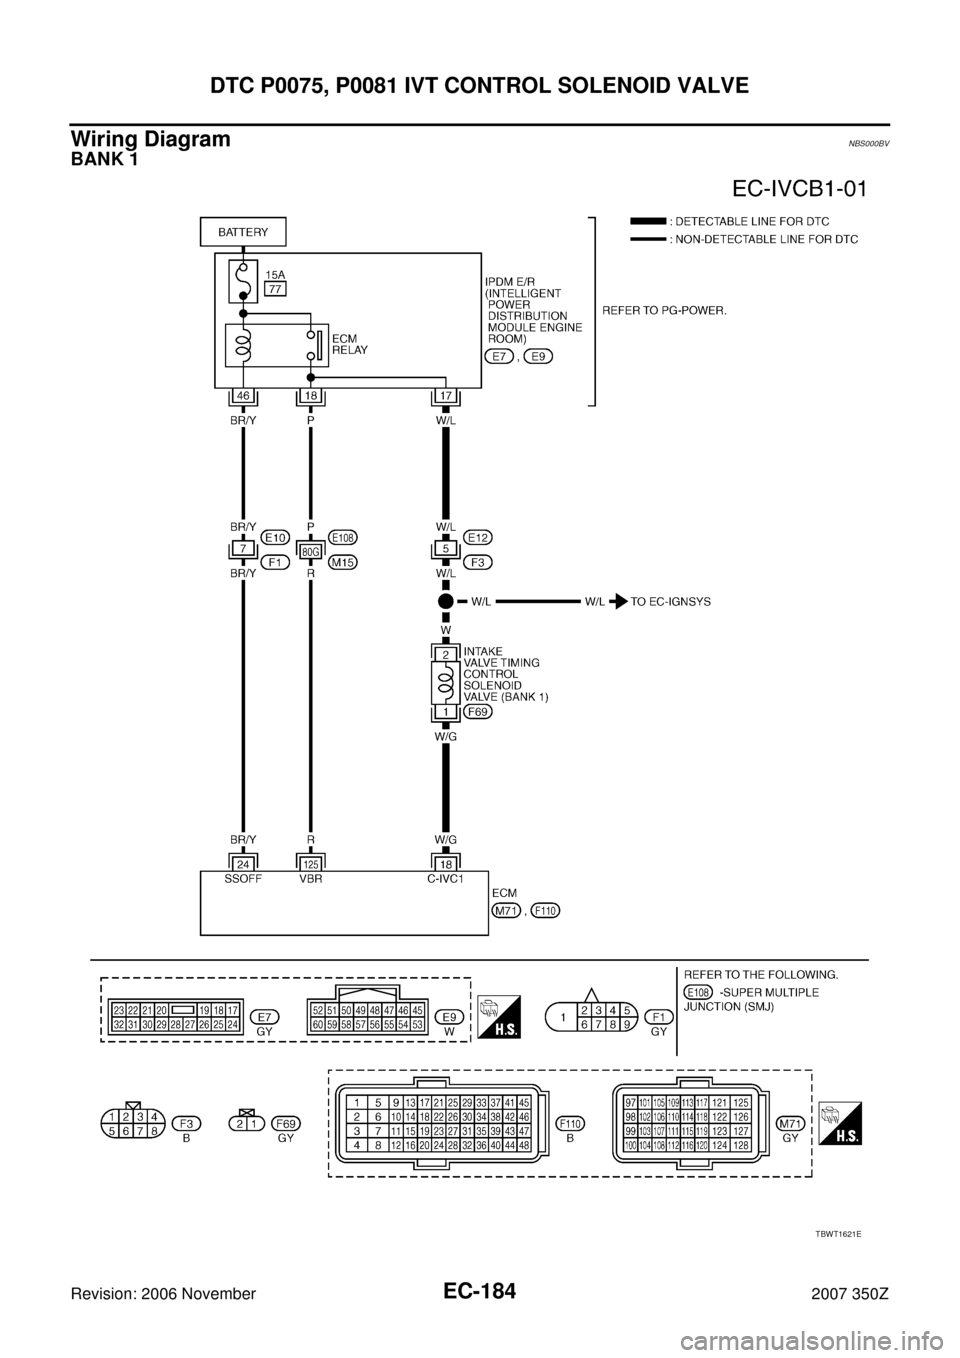 NISSAN 350Z 2007 Z33 Engine Control Owners Guide EC-184
DTC P0075, P0081 IVT CONTROL SOLENOID VALVE
Revision: 2006 November2007 350Z
Wiring DiagramNBS000BV
BANK 1
TBWT1621E 